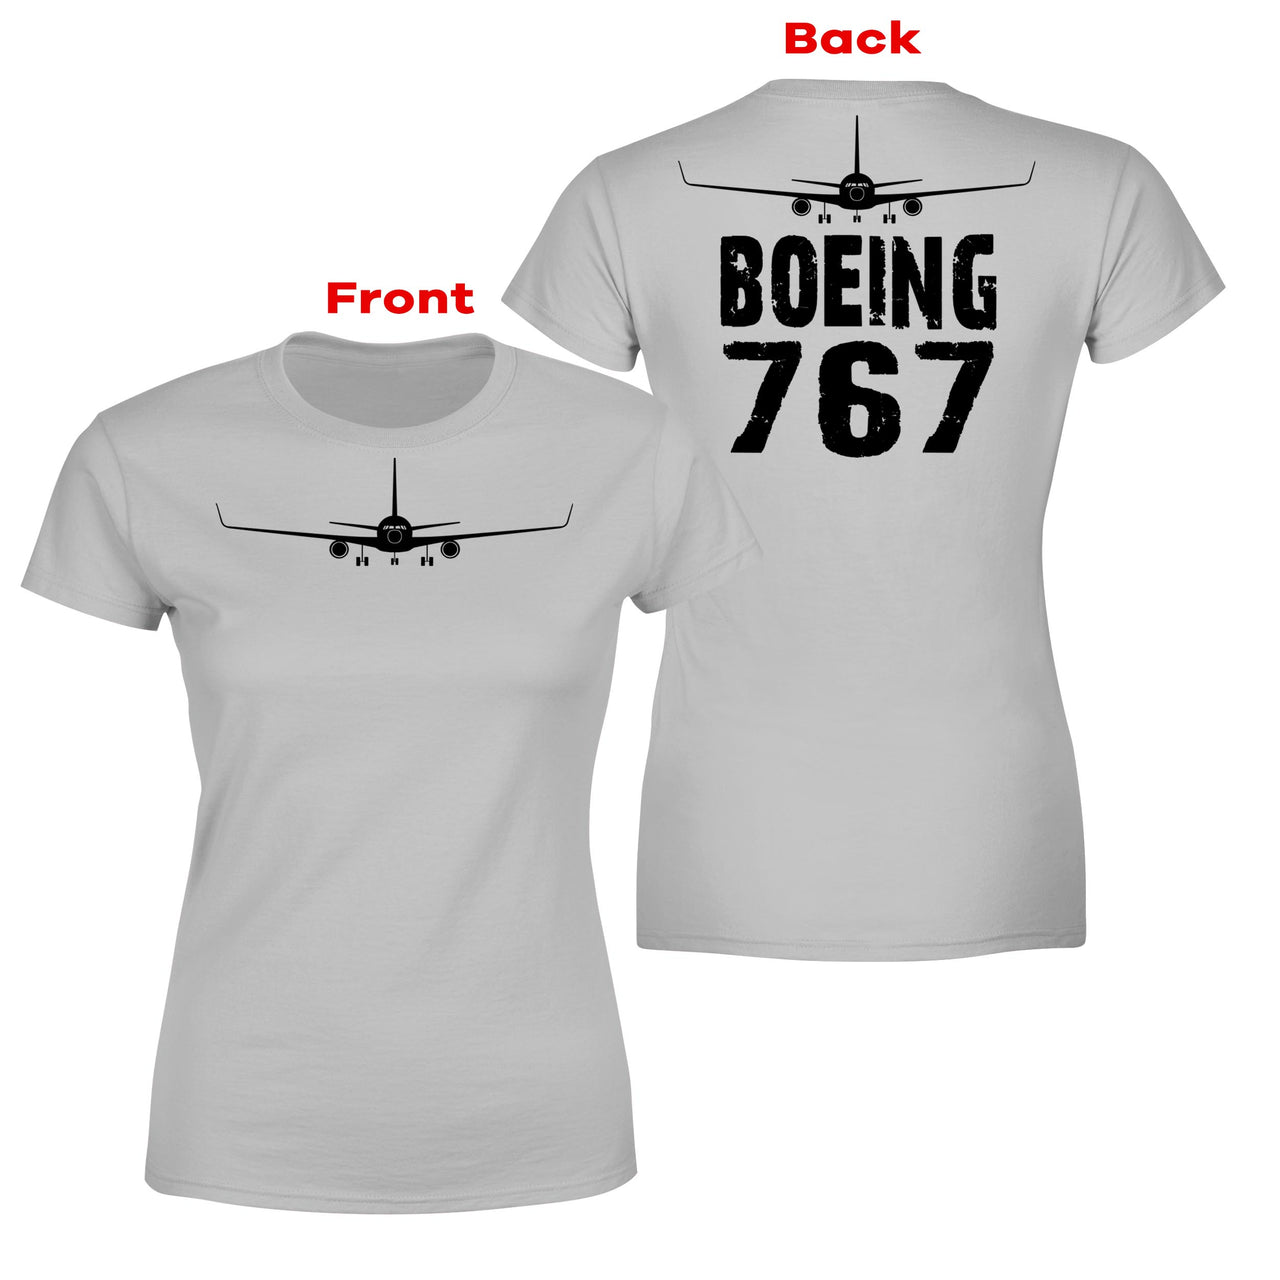 Boeing 767 & Plane Designed Double-Side T-Shirts